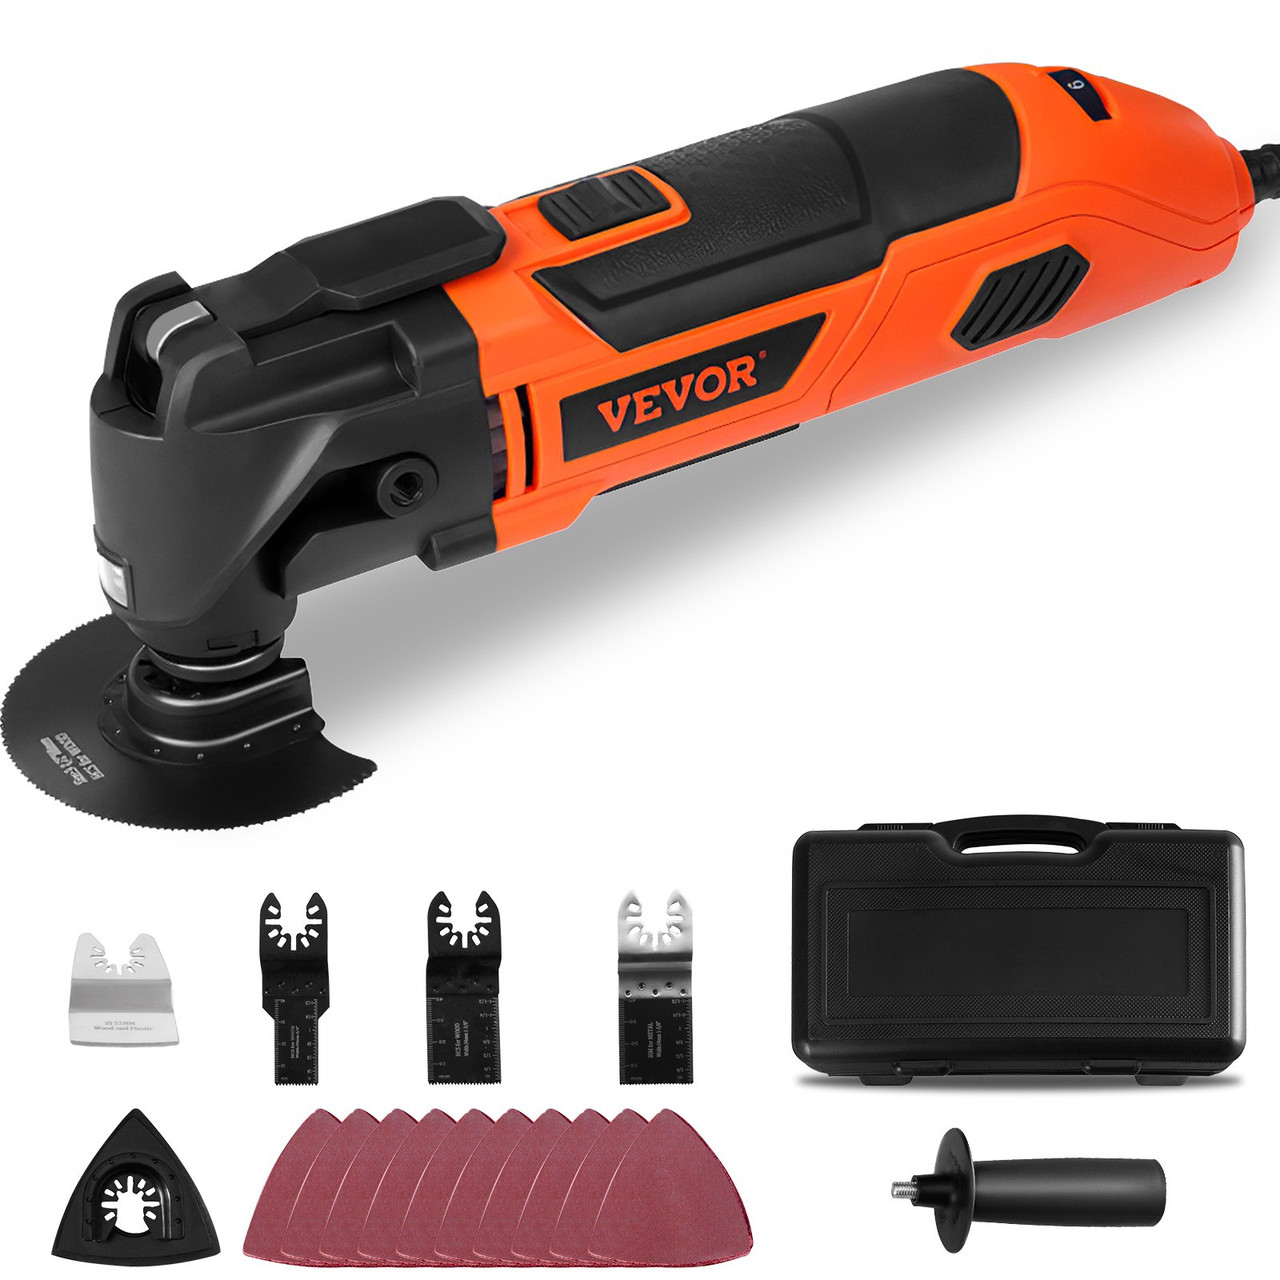 2.5A Oscillating Tool, 11000-22000 OPM 6 Variable Speeds Oscillating Multi Tool with 3.1° Oscillating Angle, 17PCS Saw Accessories, LED Light & BMC Case for Cutting, Sanding, Grinding, Scraping